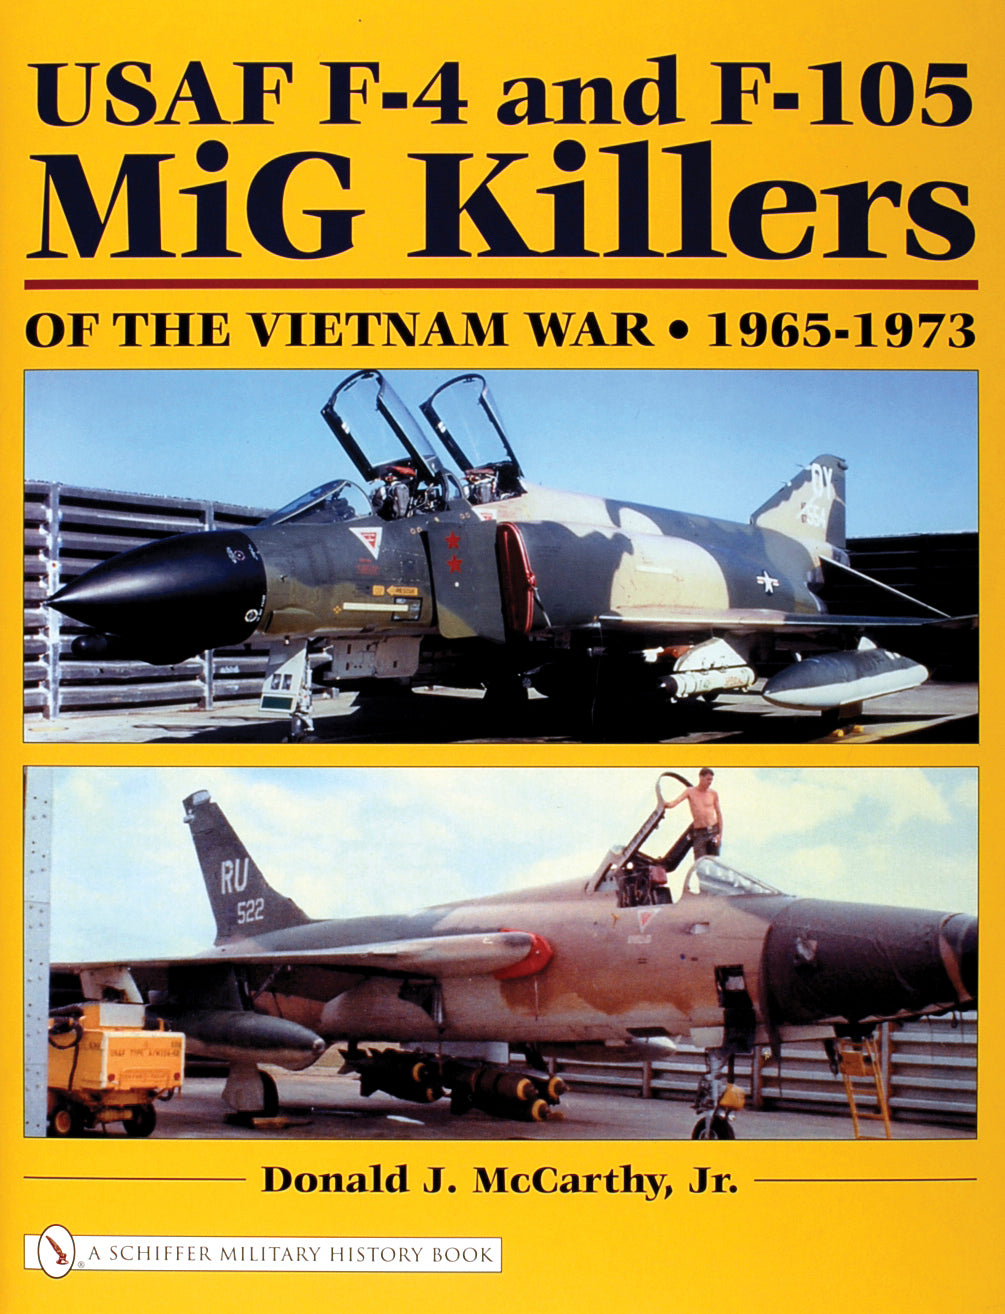 USAF F-4 and F-105 MiG Killers of the Vietnam War